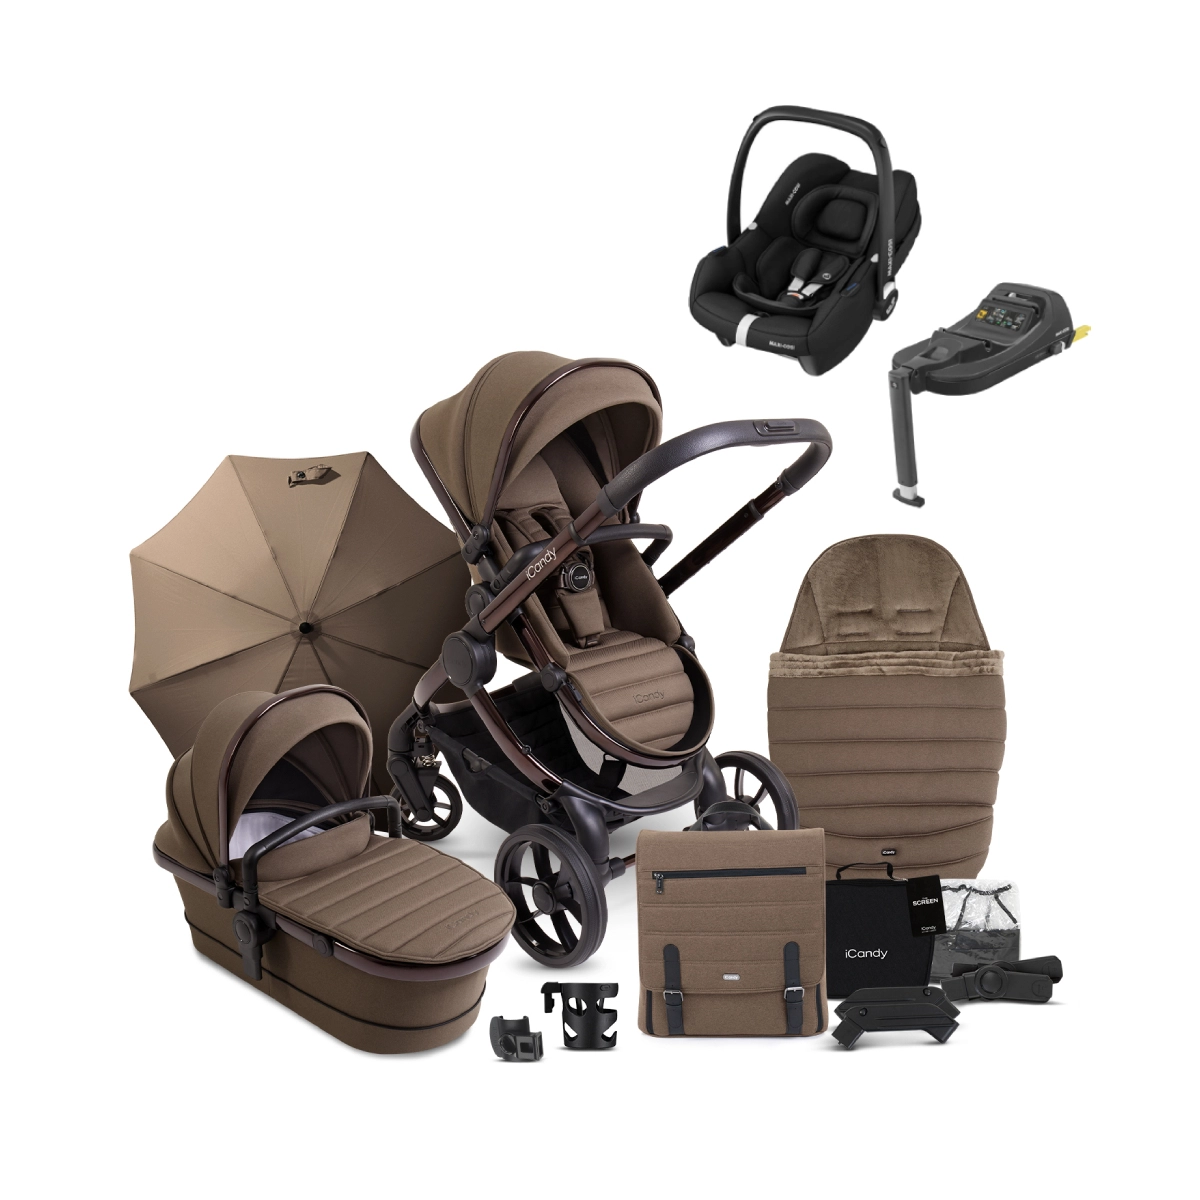 Image of iCandy Peach 7 Maxi Cosi Cabriofix i-Size Complete Travel System Bundle - Coco + Free Parvel Go Motion Sensor worth £69.99